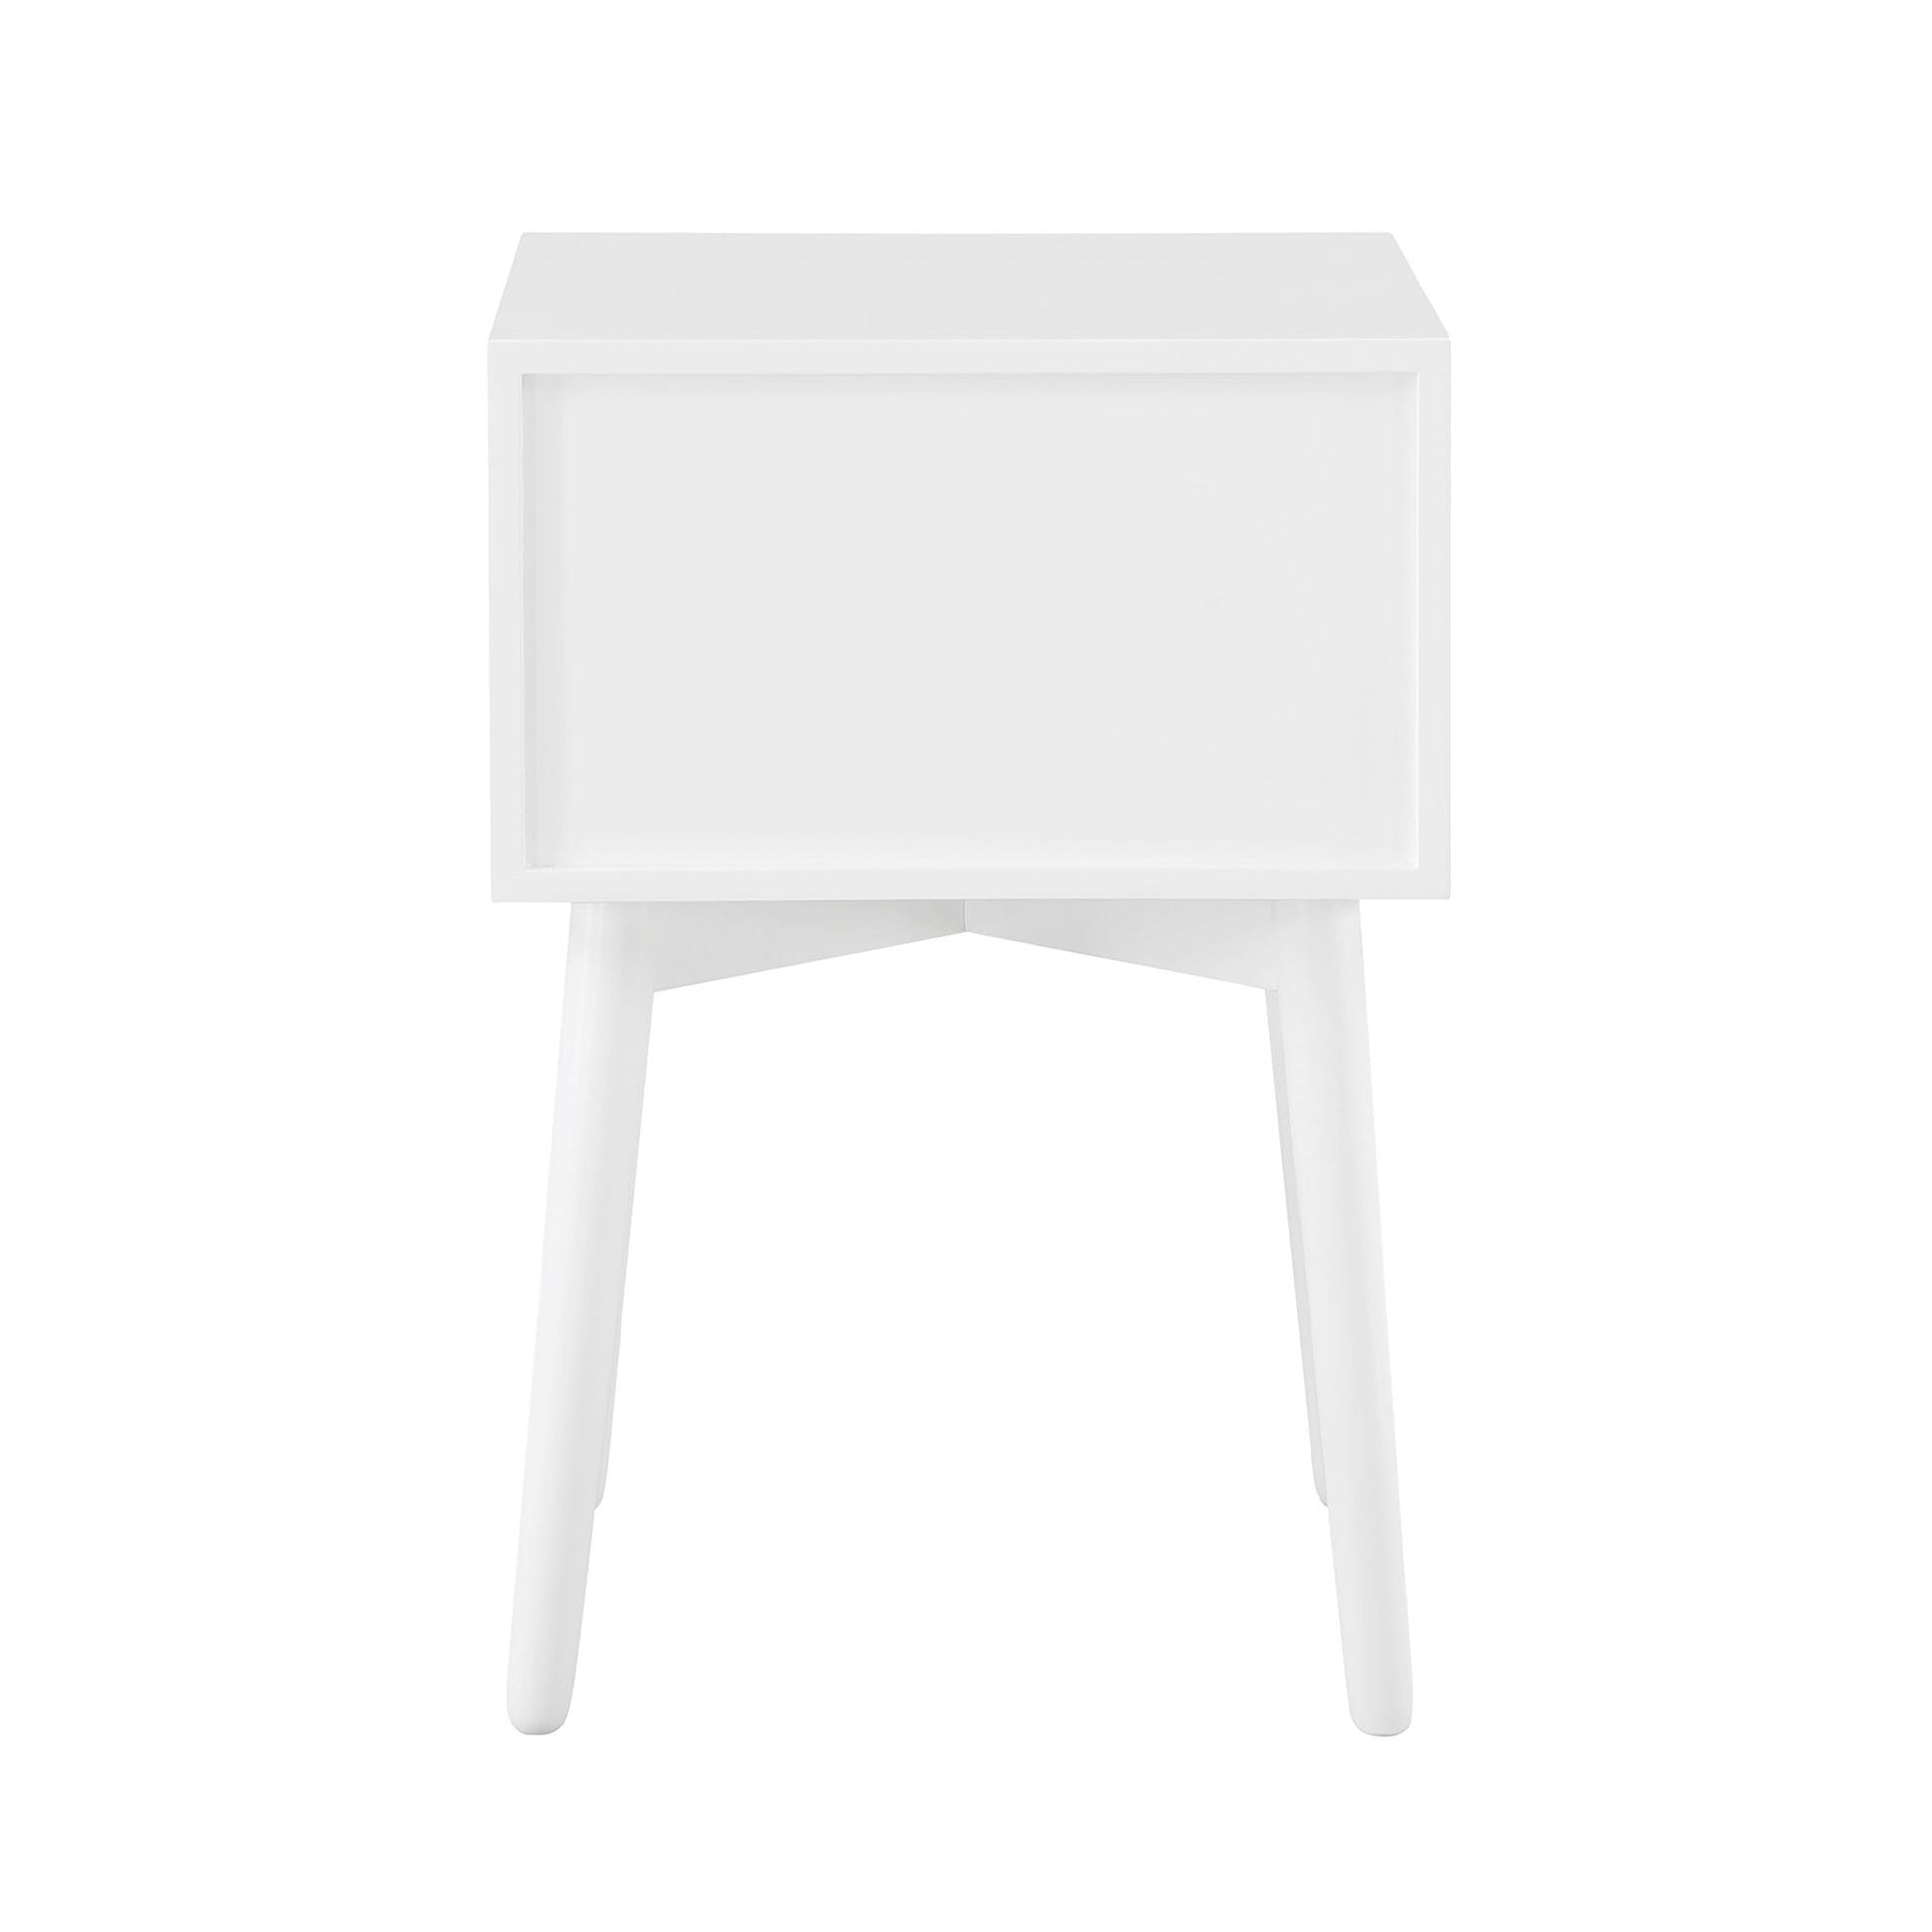 Front-facing back view of a modern white two-drawer compact nightstand with splayed legs on a white background